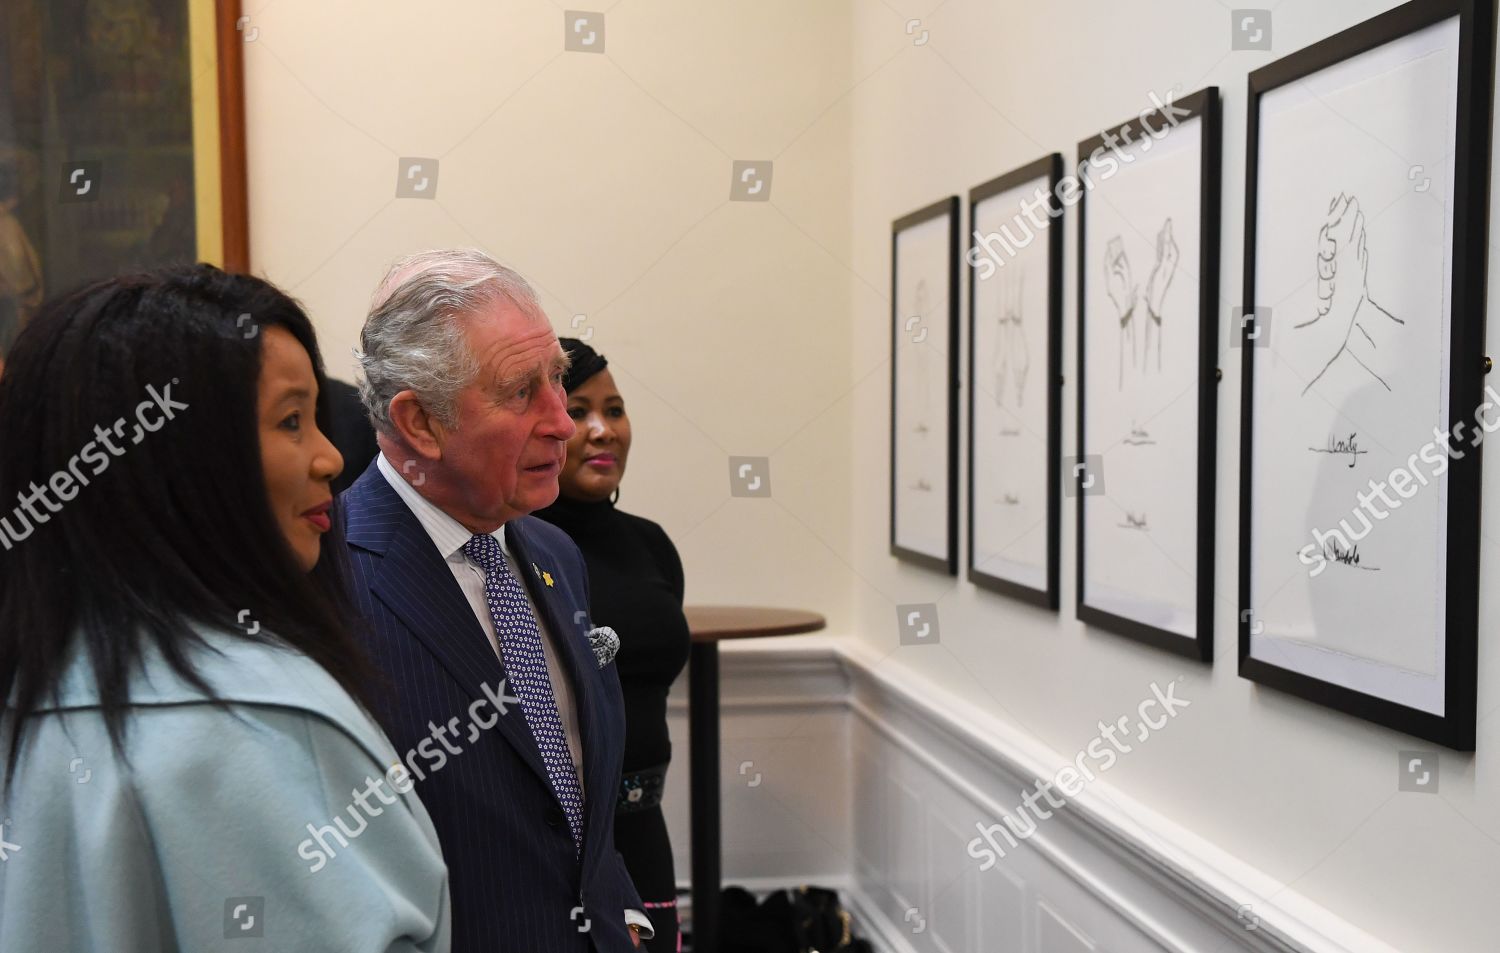 prince-charles-and-duchess-of-cornwall-visit-liverpool-uk-shutterstock-editorial-10102968c.jpg